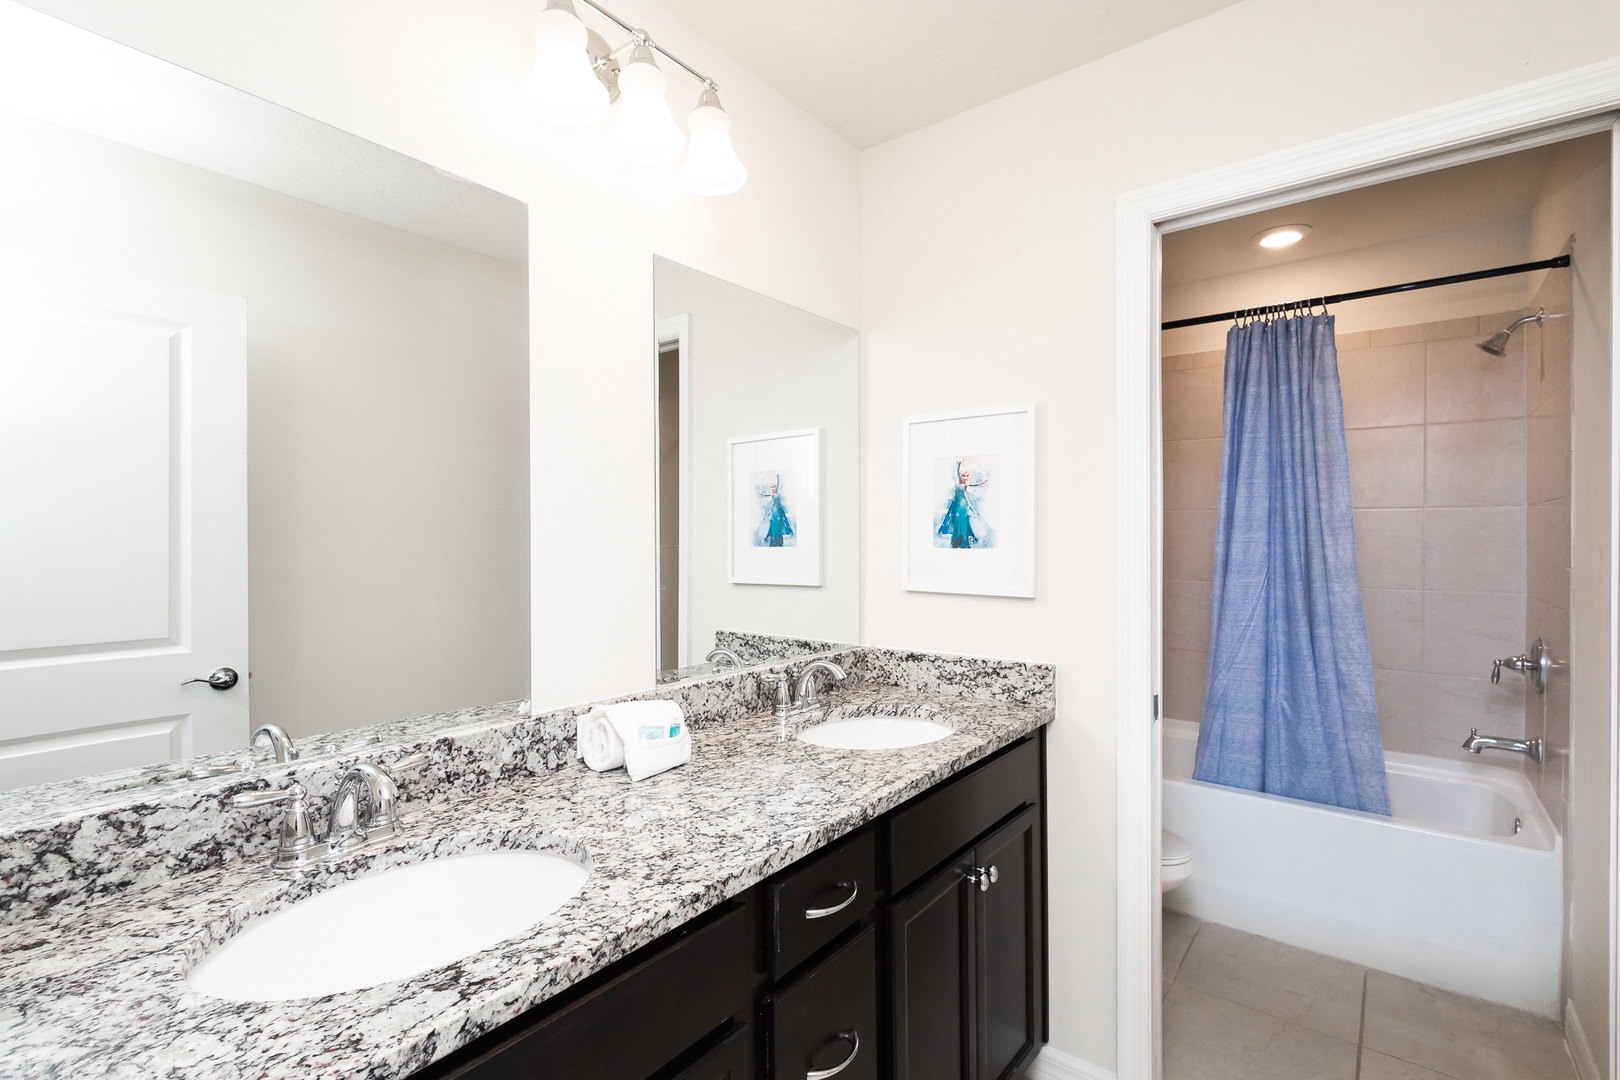 This 2nd floor hall bathroom includes a double vanity & shower/tub combo